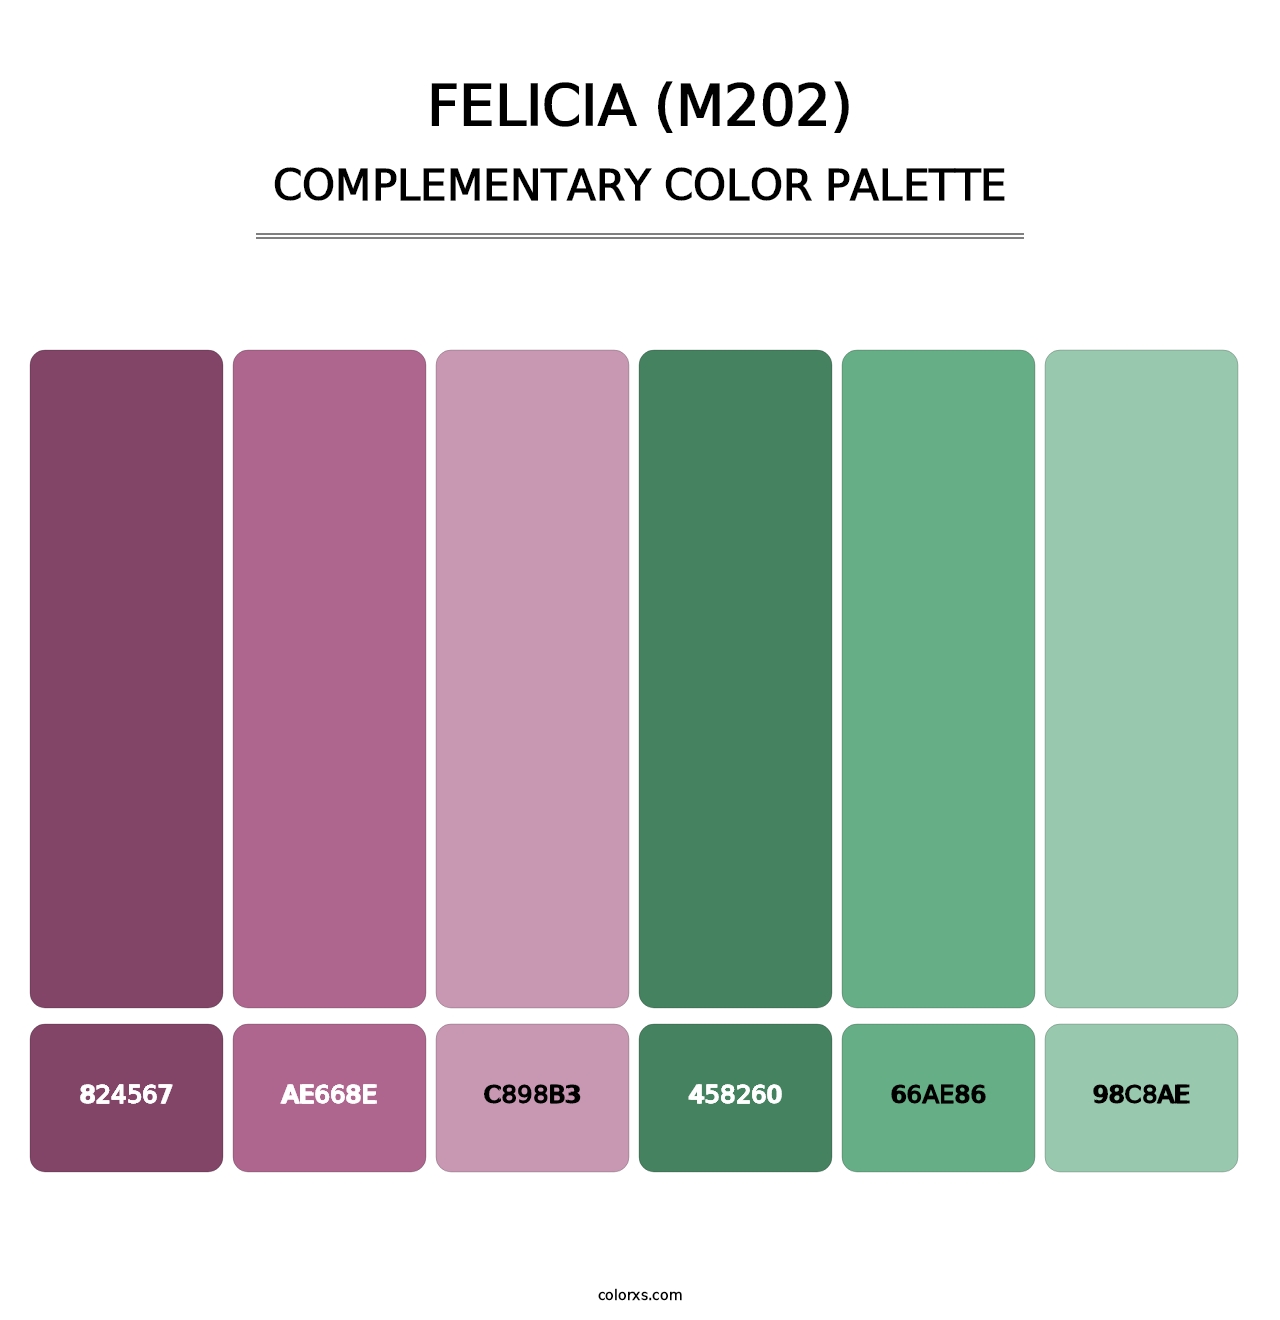 Felicia (M202) - Complementary Color Palette